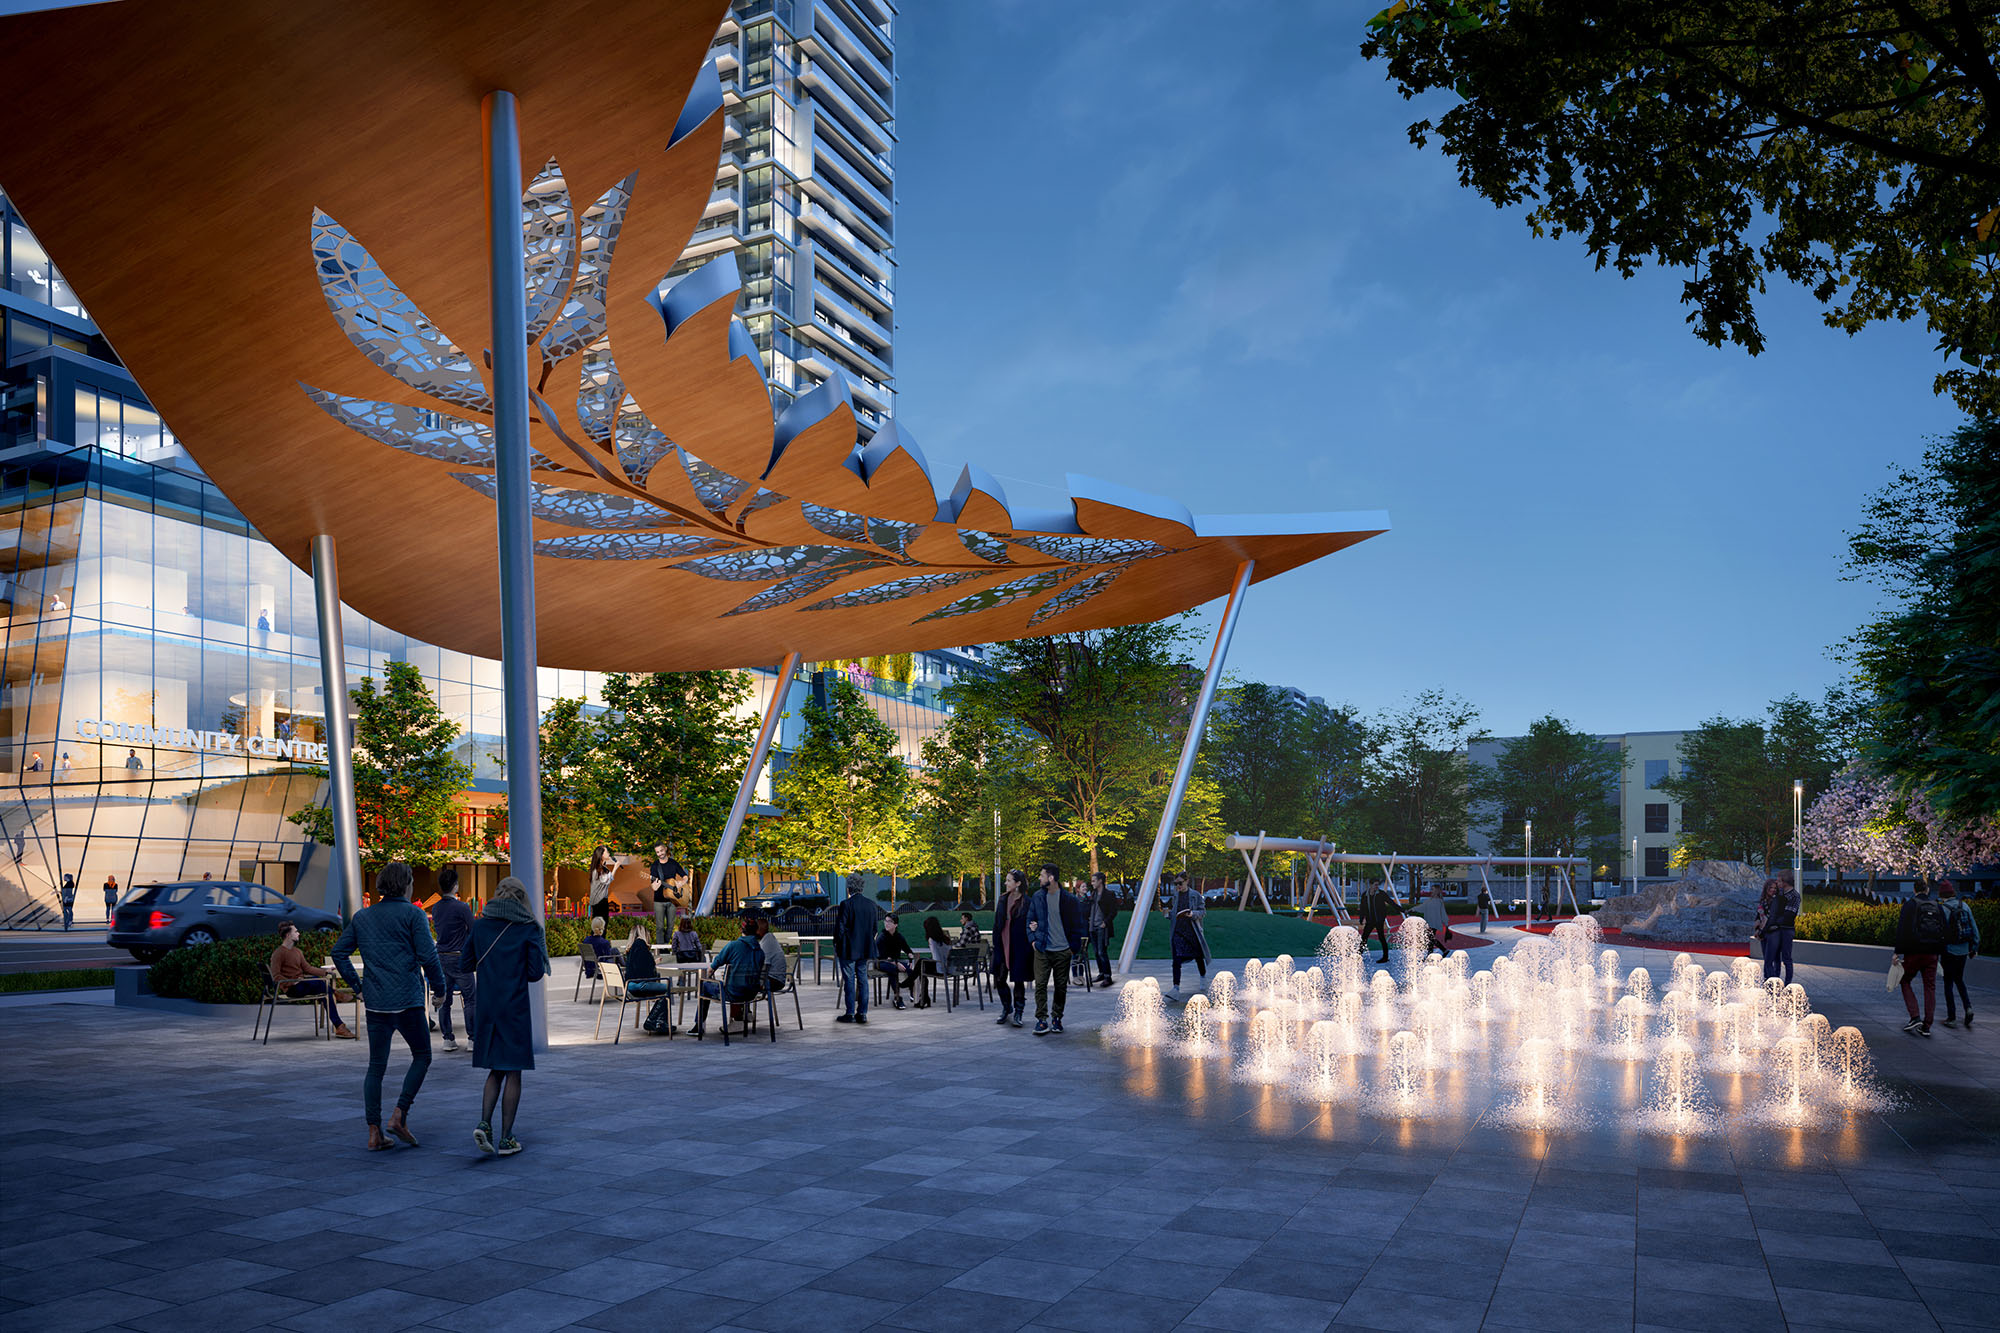 The image shows an artist rendering of the concept design, depicting the central plaza of the new park. The shade structure is to the left with café-style seating below. To the right in the foreground is a potential location of a water feature.